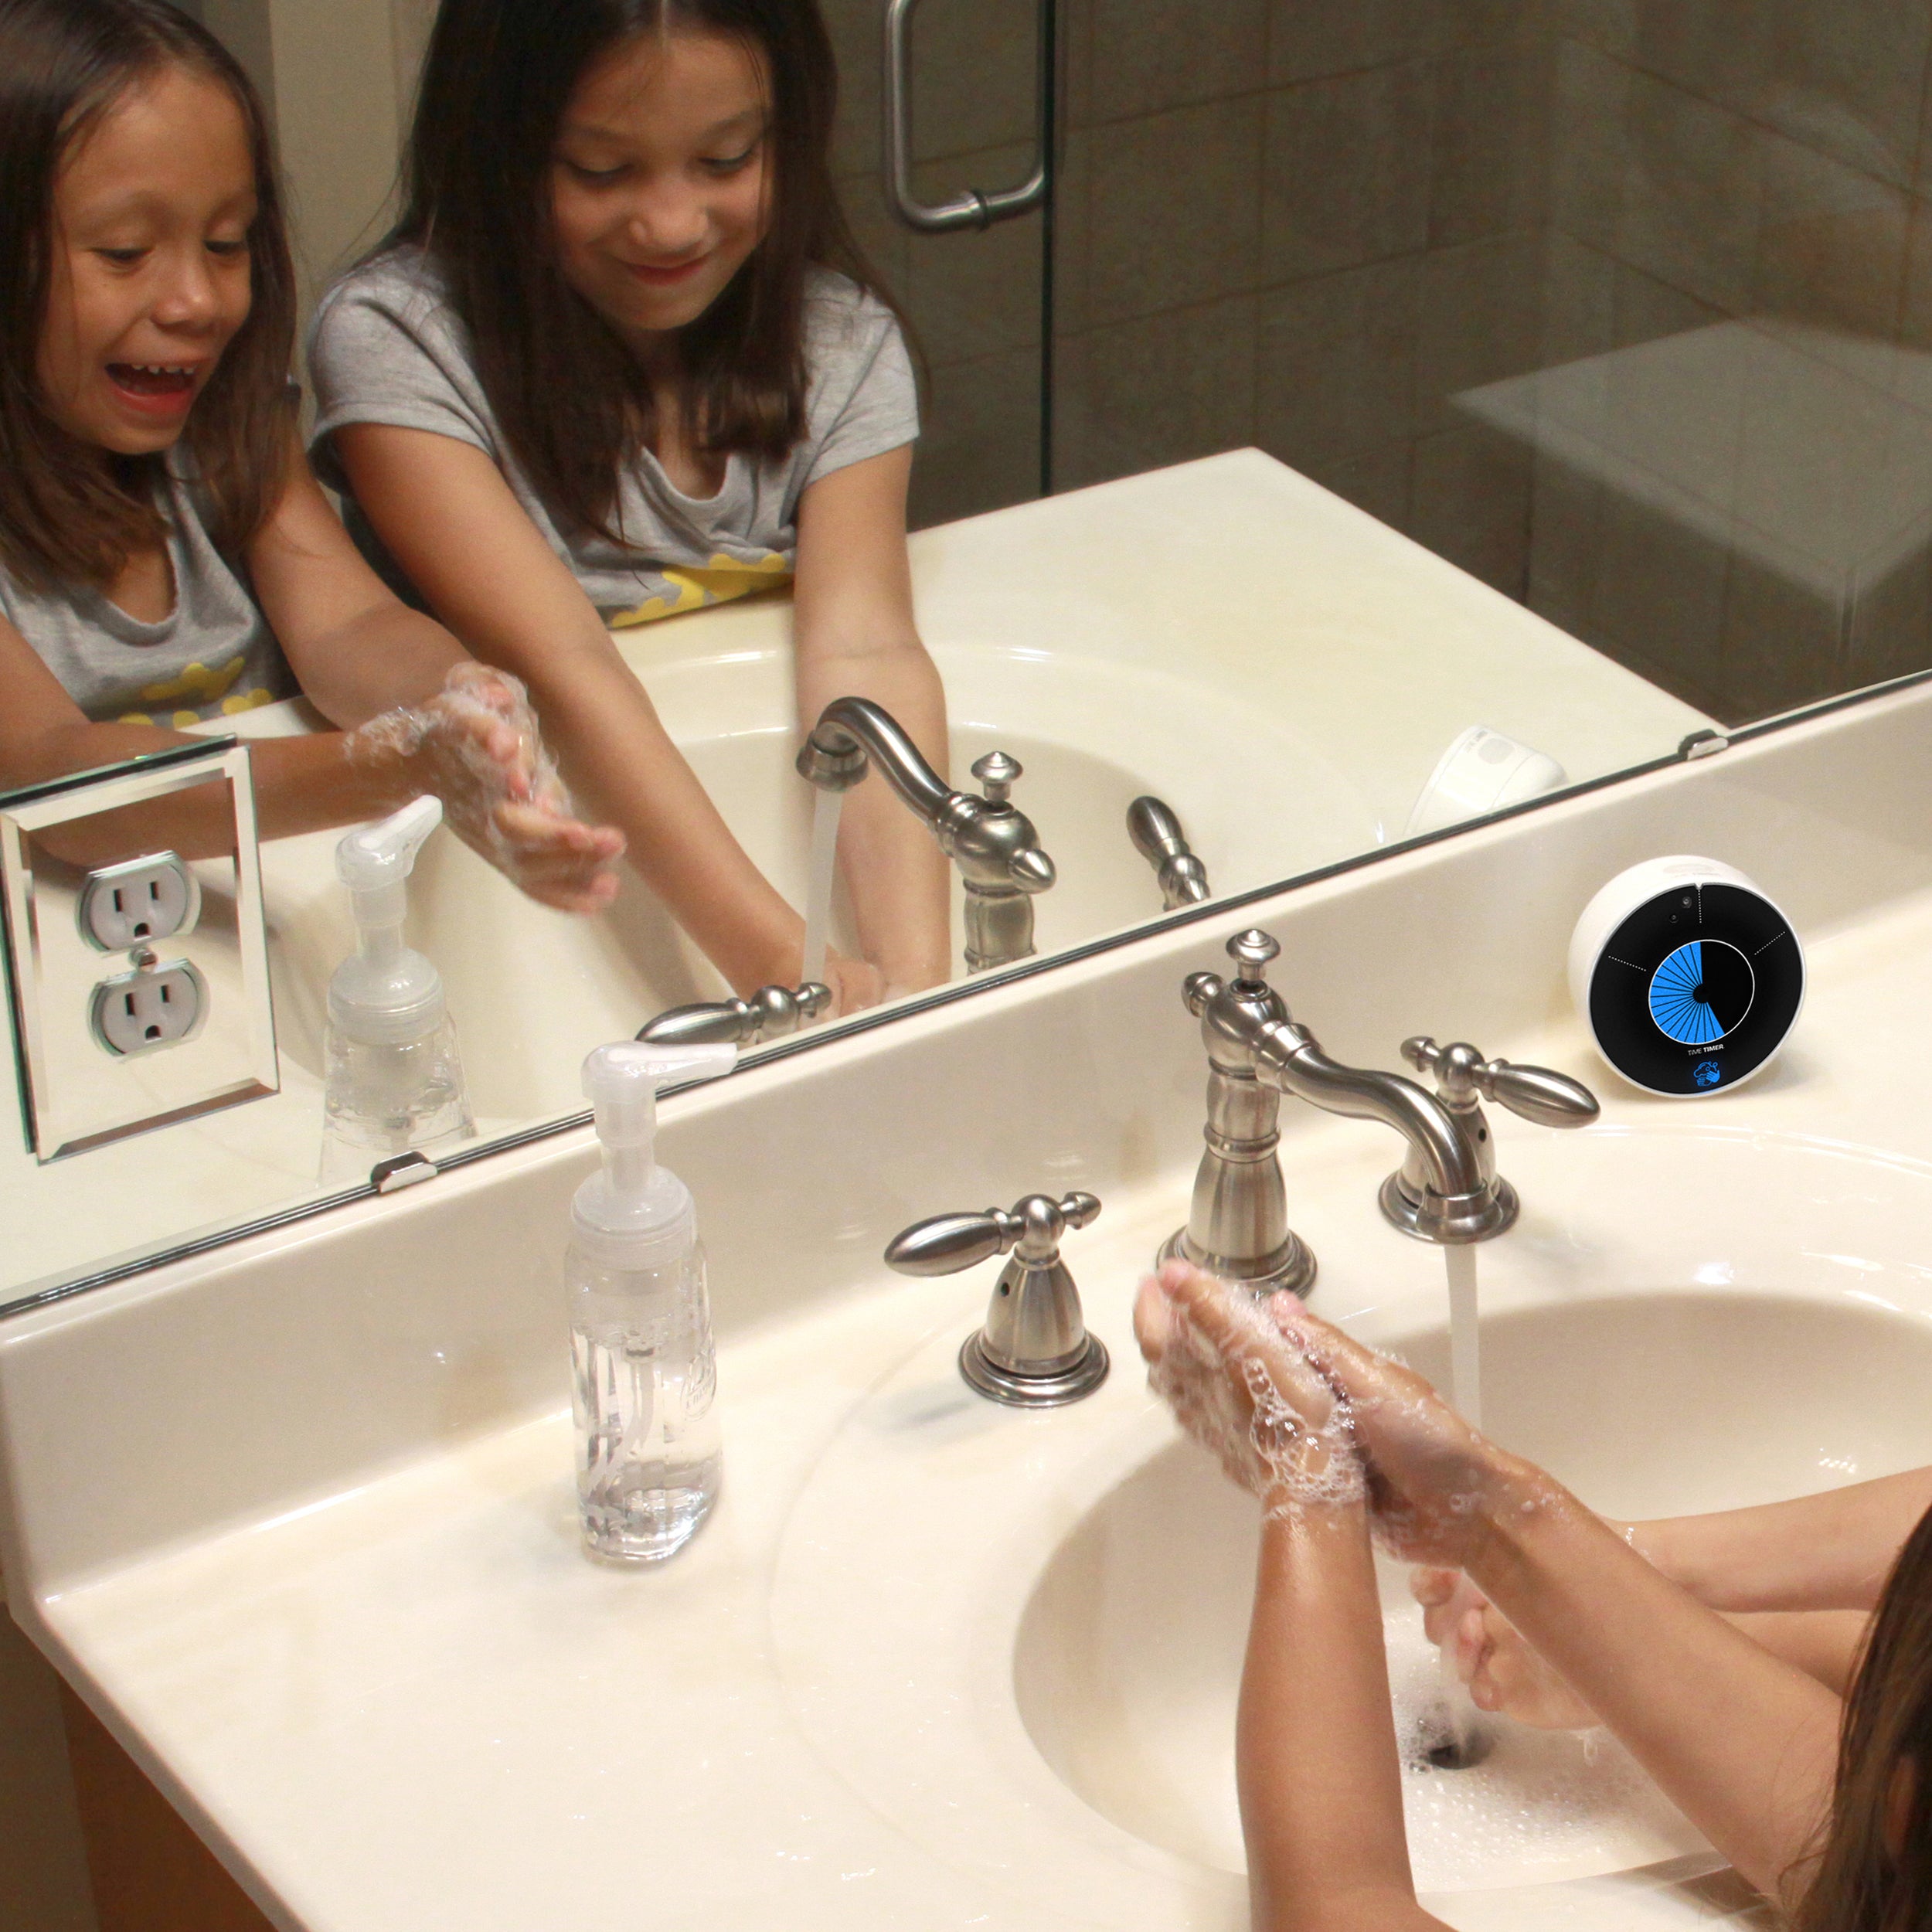 Two young girls, ages 6 and 7, have fun and smile while washing their hands in a bathroom setting. The Time Timer WASH visual timer for handwashing sits on the counter beside the sink. 